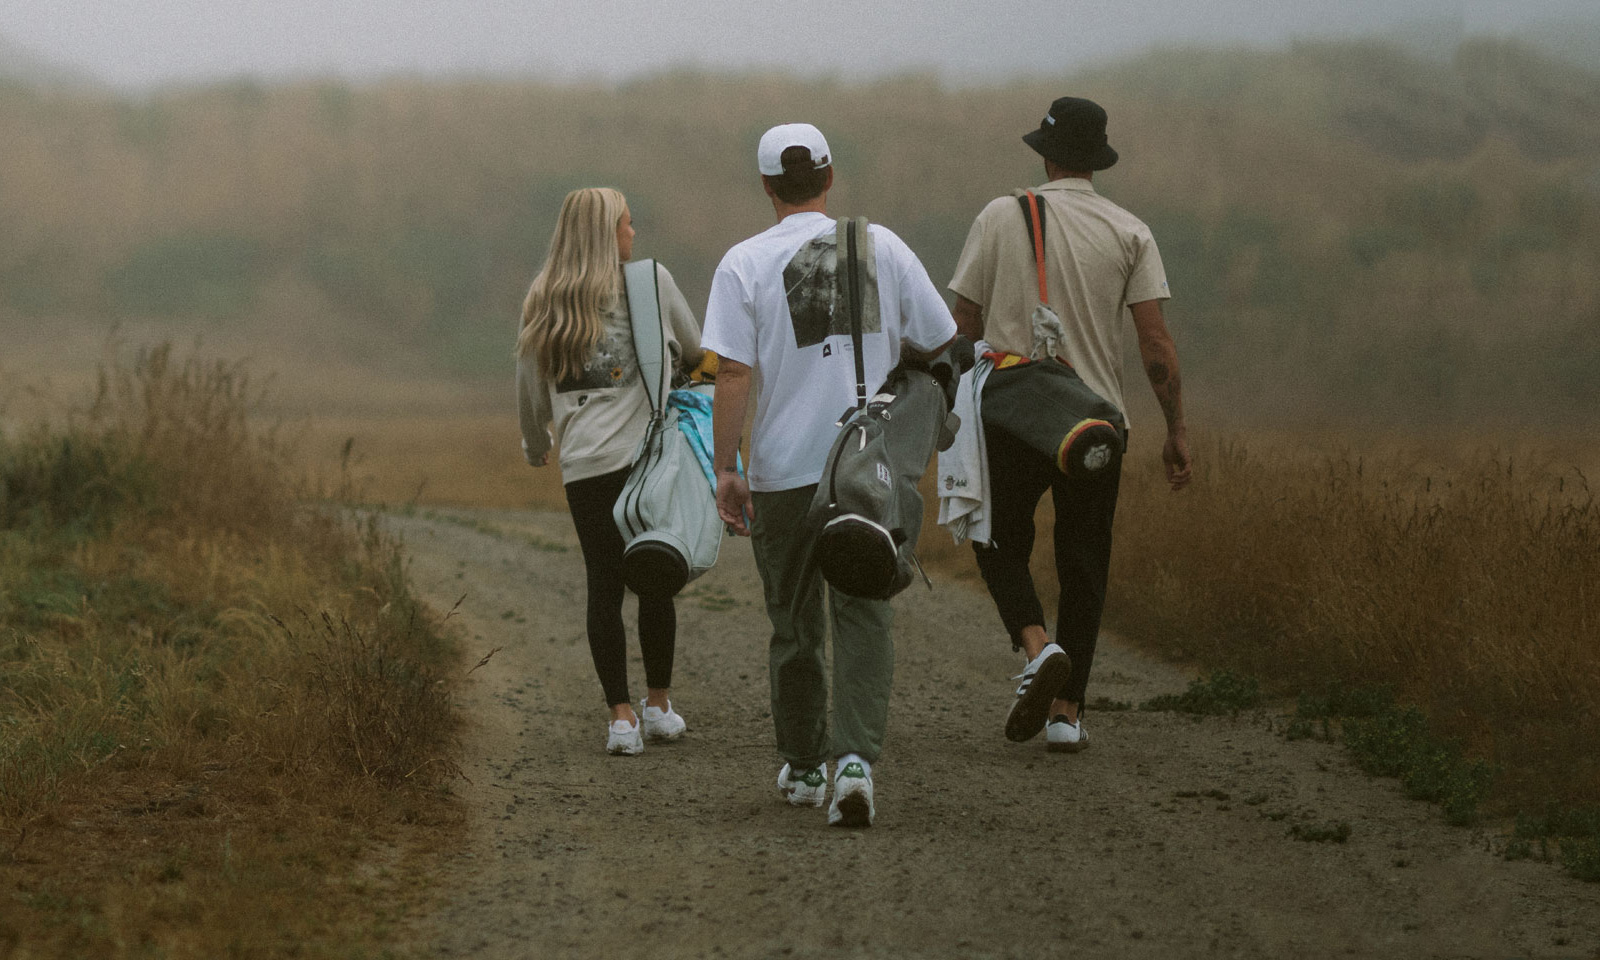 Burning Cart Society has partnered with Adidas for a new Sustainable Golf Collection Celebrating Importance of Nature.